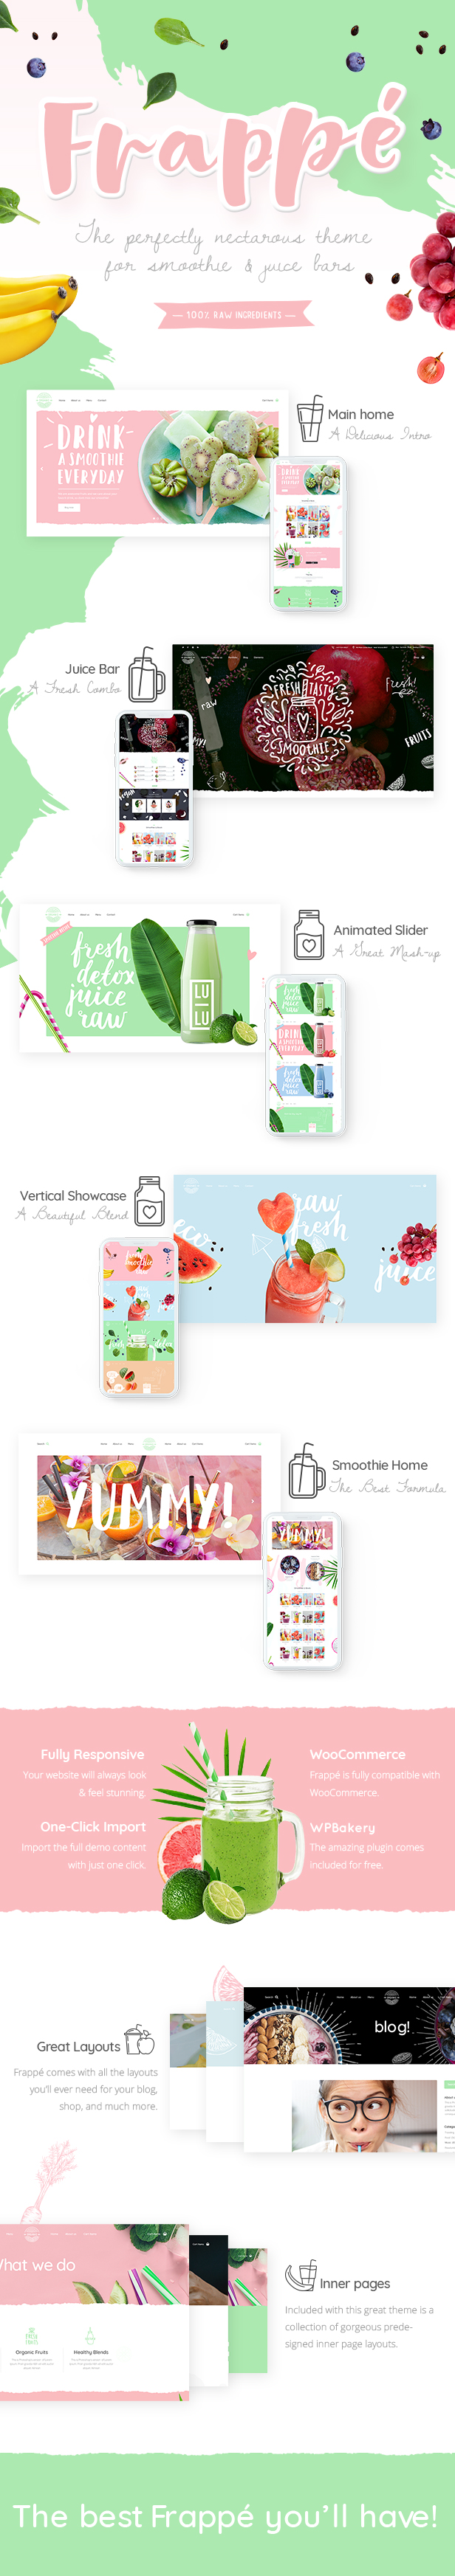 Frappé - Smoothie, Juice Bar and Organic Food Theme - 1